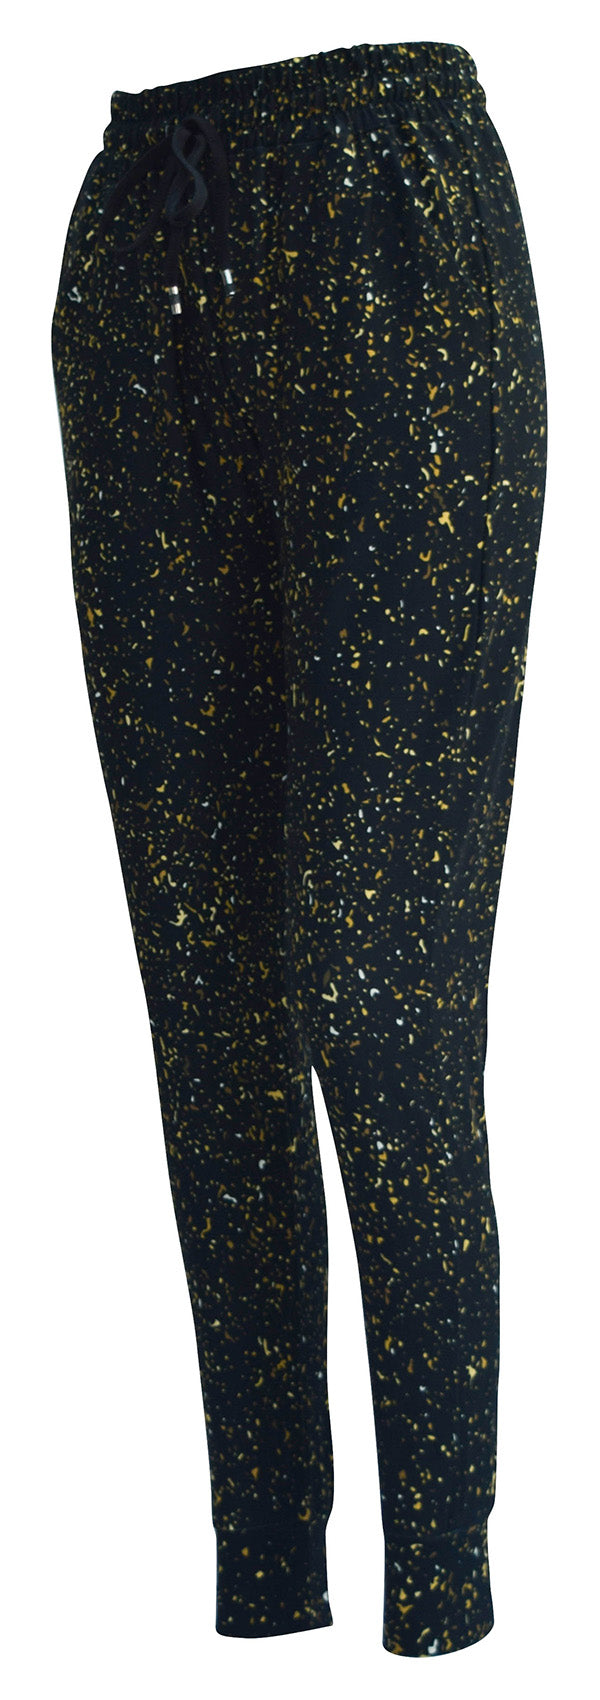 Gold Dust Lejoggers-Joggers